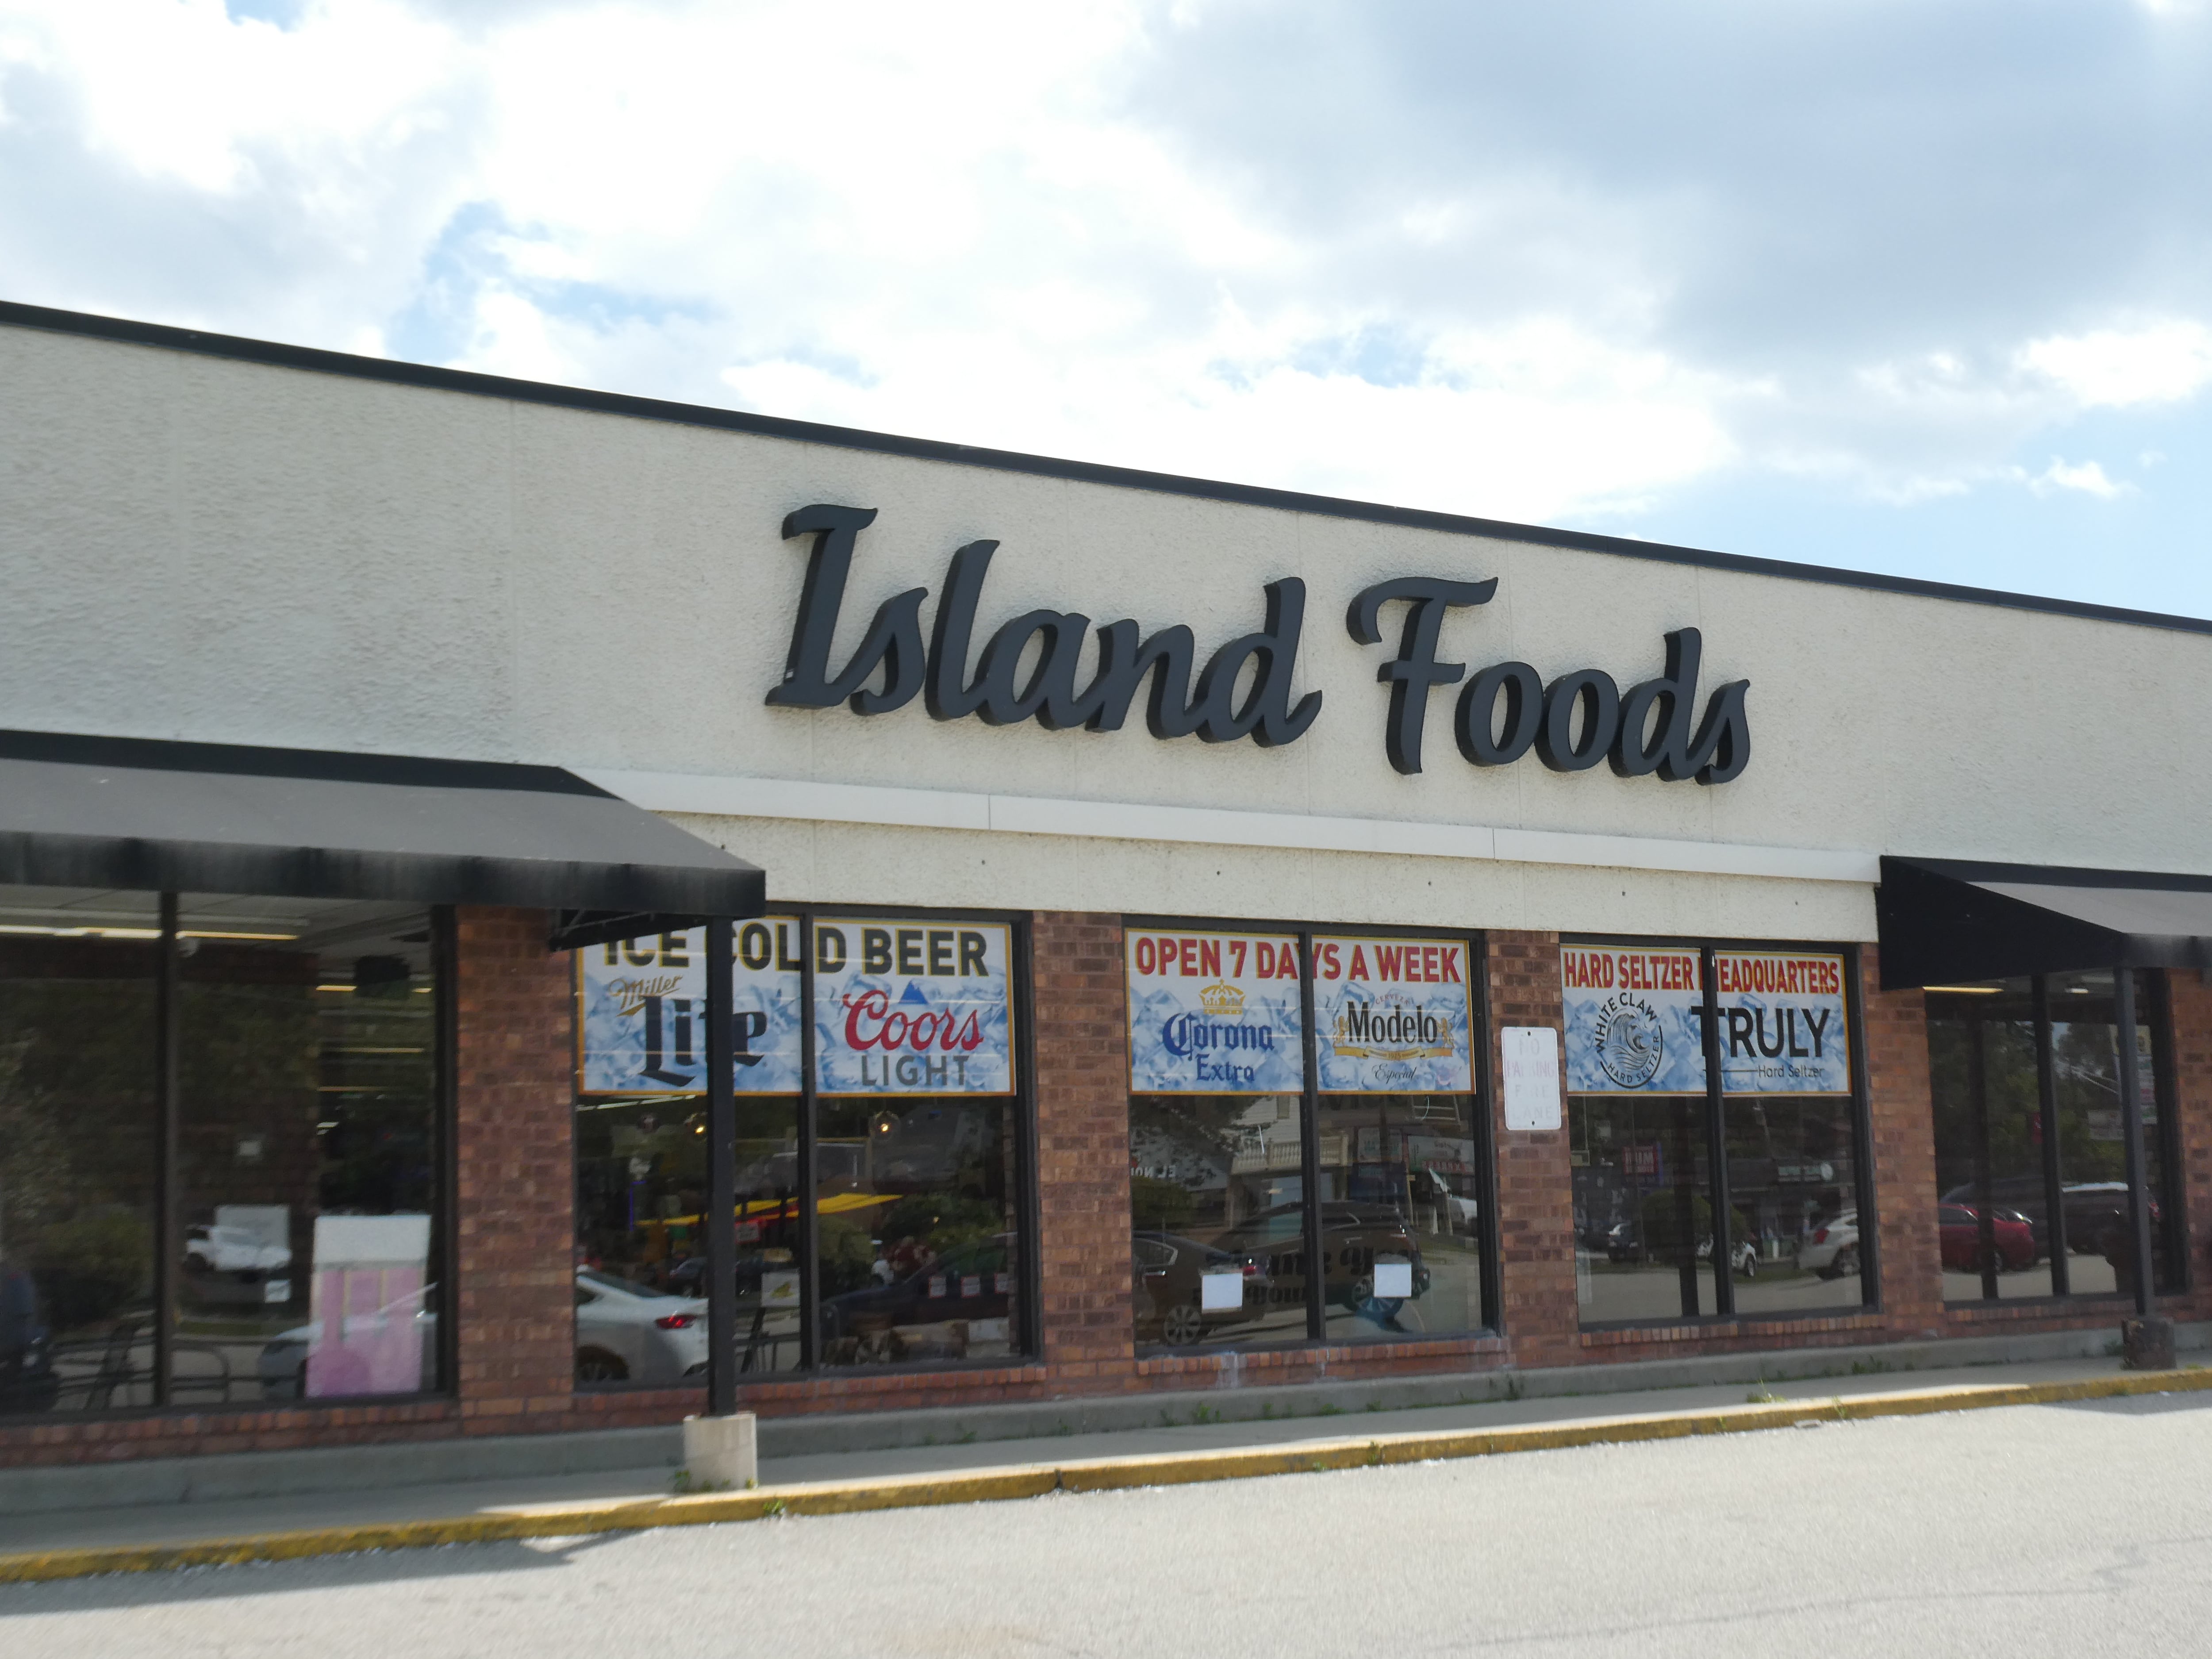 Island Foods, a grocery store in Island Lake for over 50 years, announced on Monday, July 18, 2022, that they would be closing by the end of the summer.